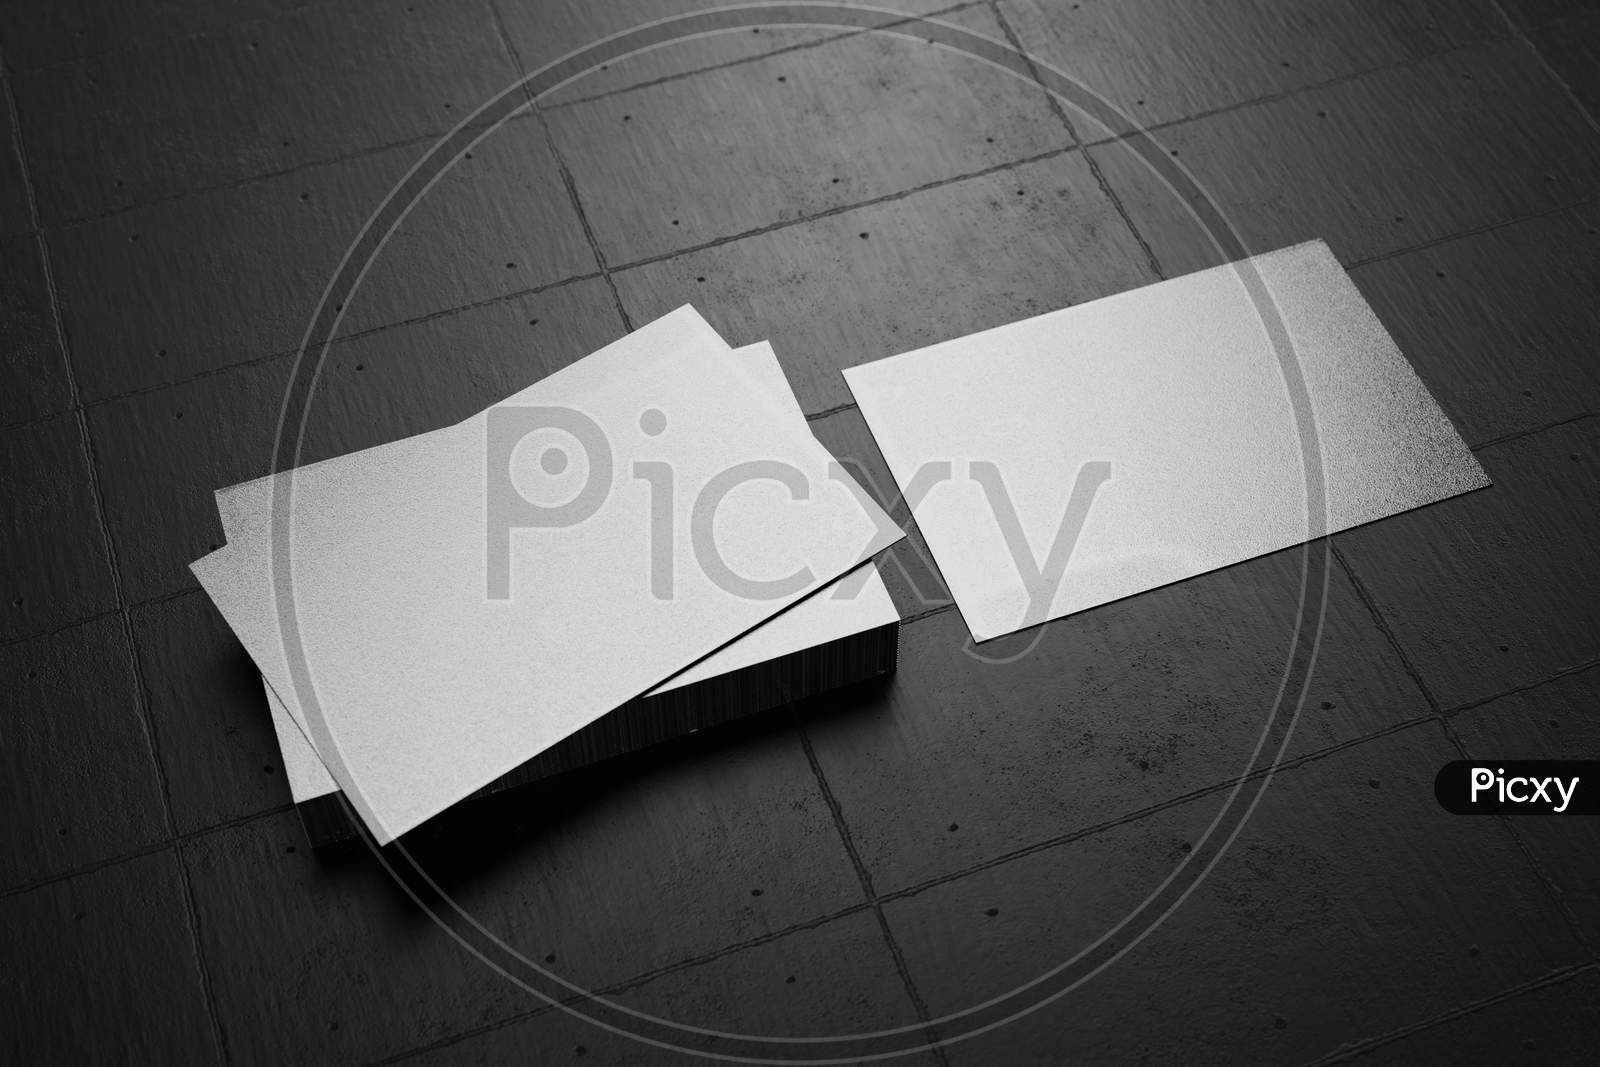 White Horizontal Business Card Paper Mockup Template With Blank Space Cover For Insert Company Logo Or Personal Identity On Black Cardboard Floor Background. Modern Concept. 3D Illustration Render